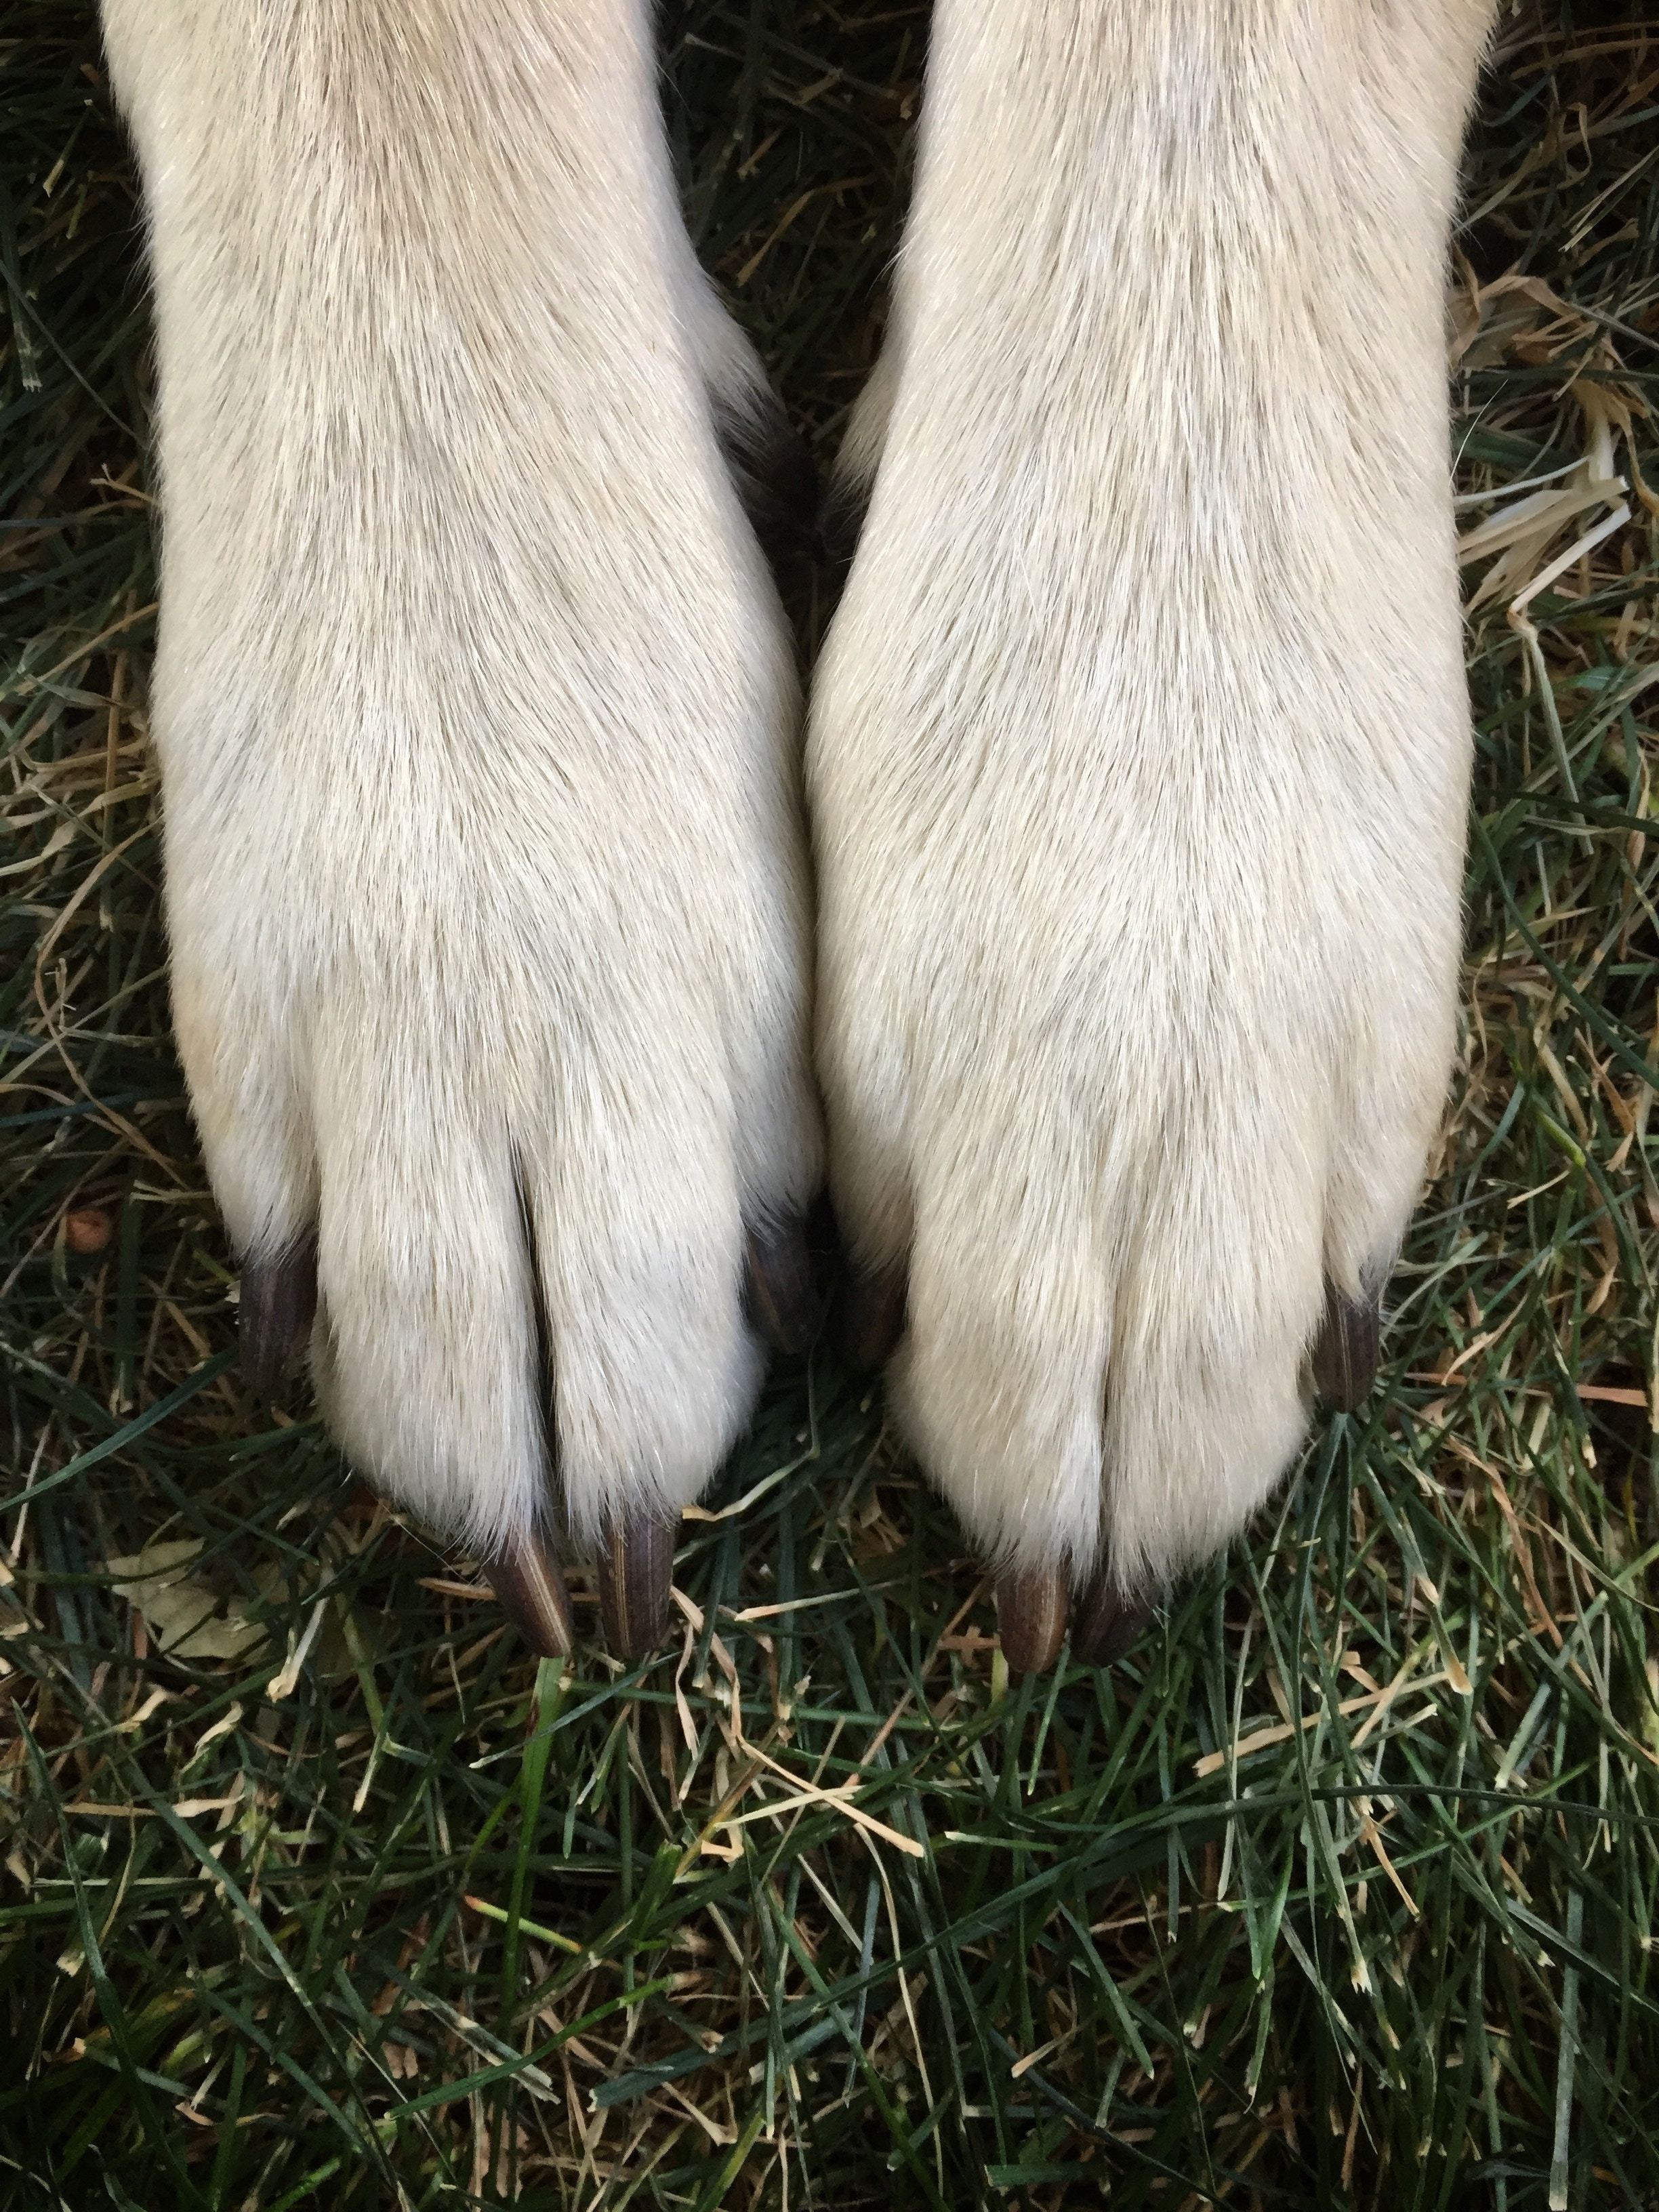 the two front paws of a dog in the grass